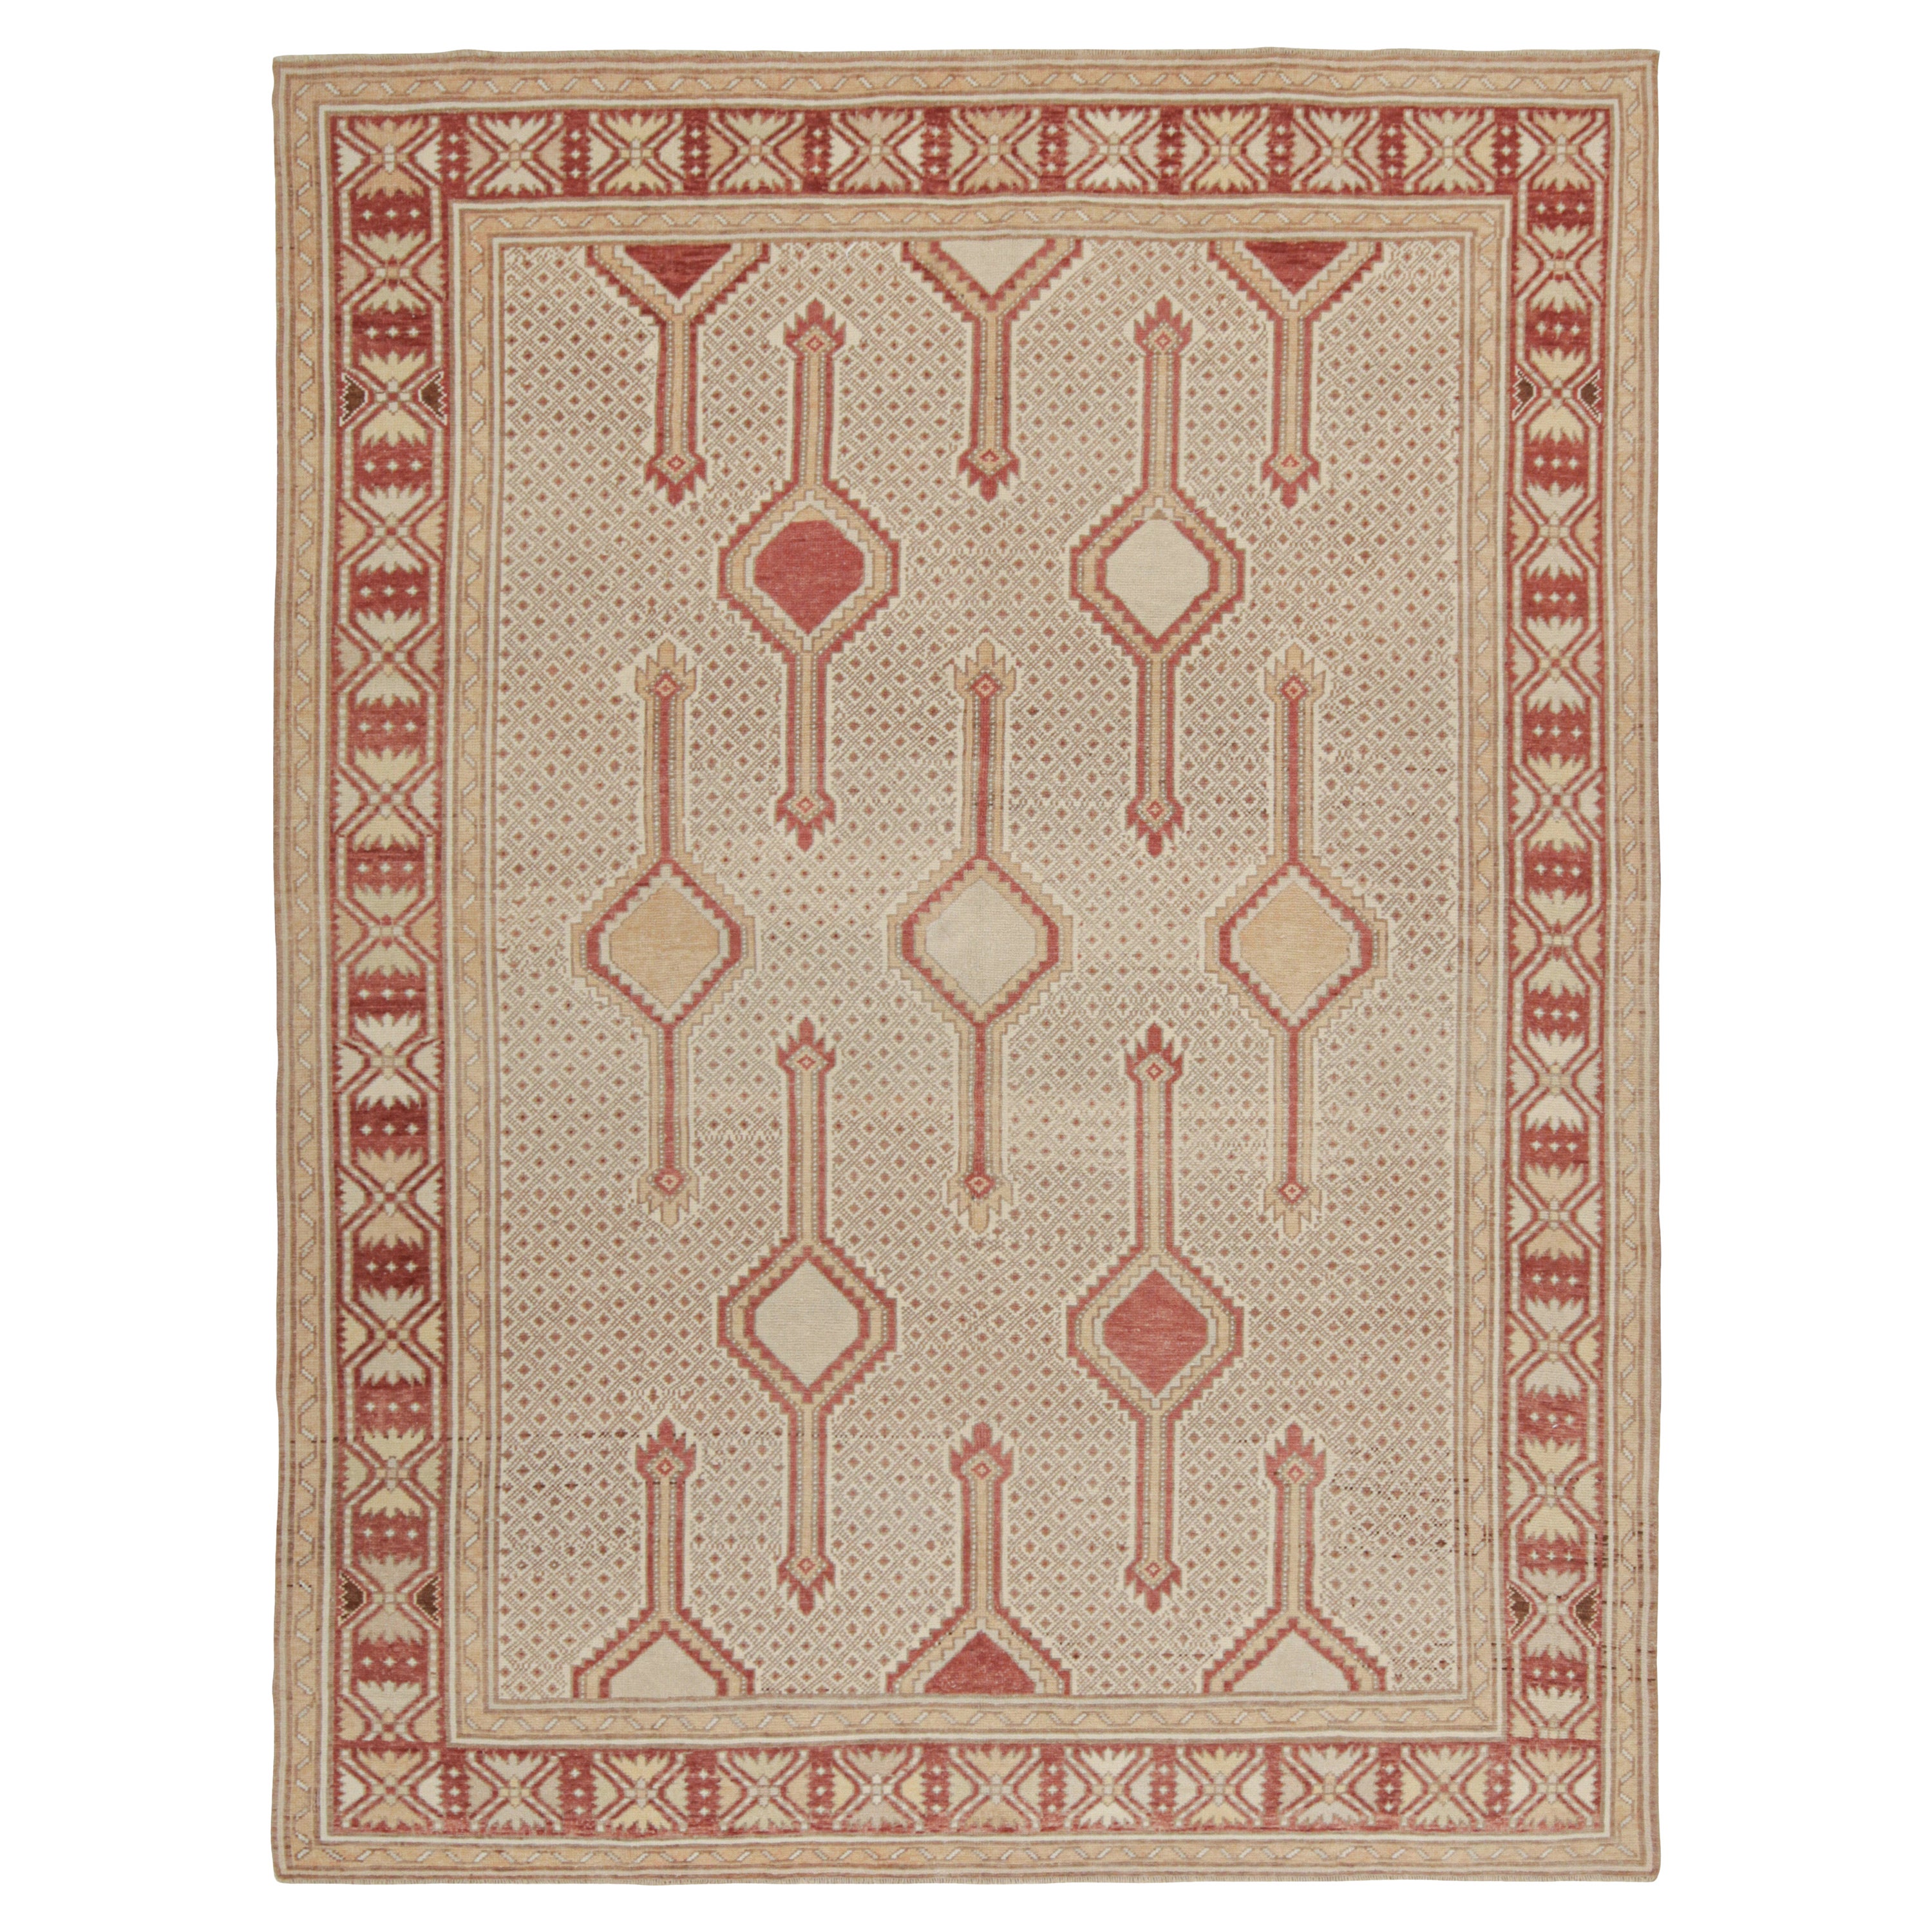 Vintage Persian Rug in Beige-Brown and Red Geometric Patterns For Sale